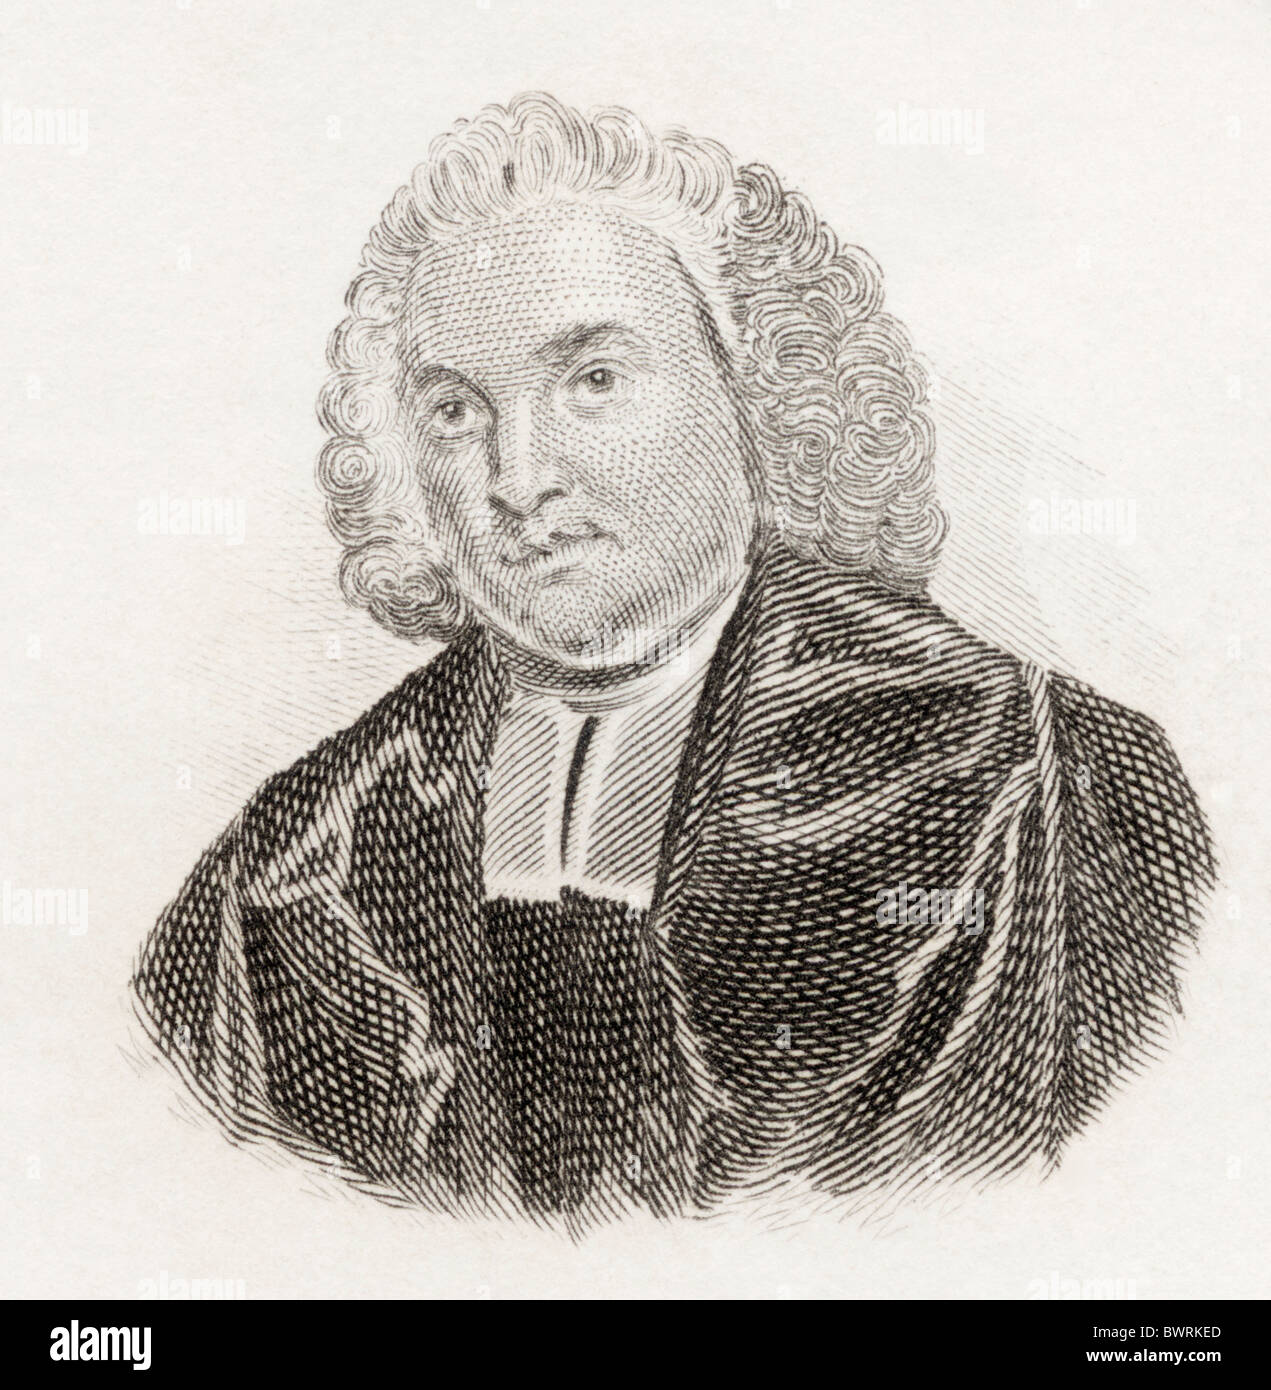 Joseph Warton, 1722 to 1800. English academic and literary critic. From Crabb's Historical Dictionary published 1825. Stock Photo